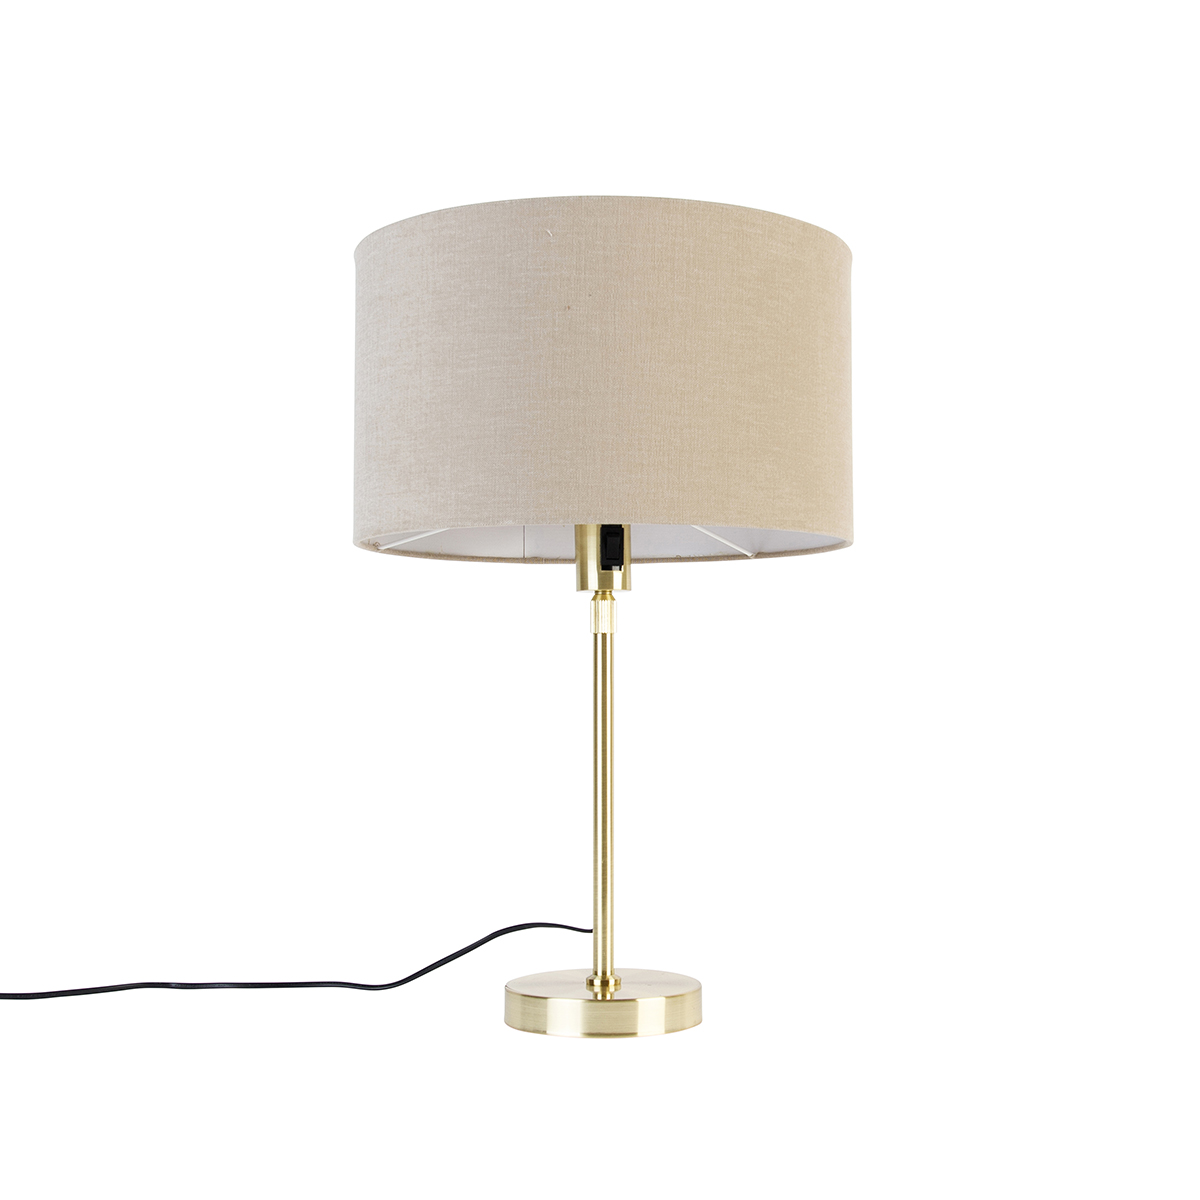 Table lamp gold adjustable with shade light brown 35 cm - Parte